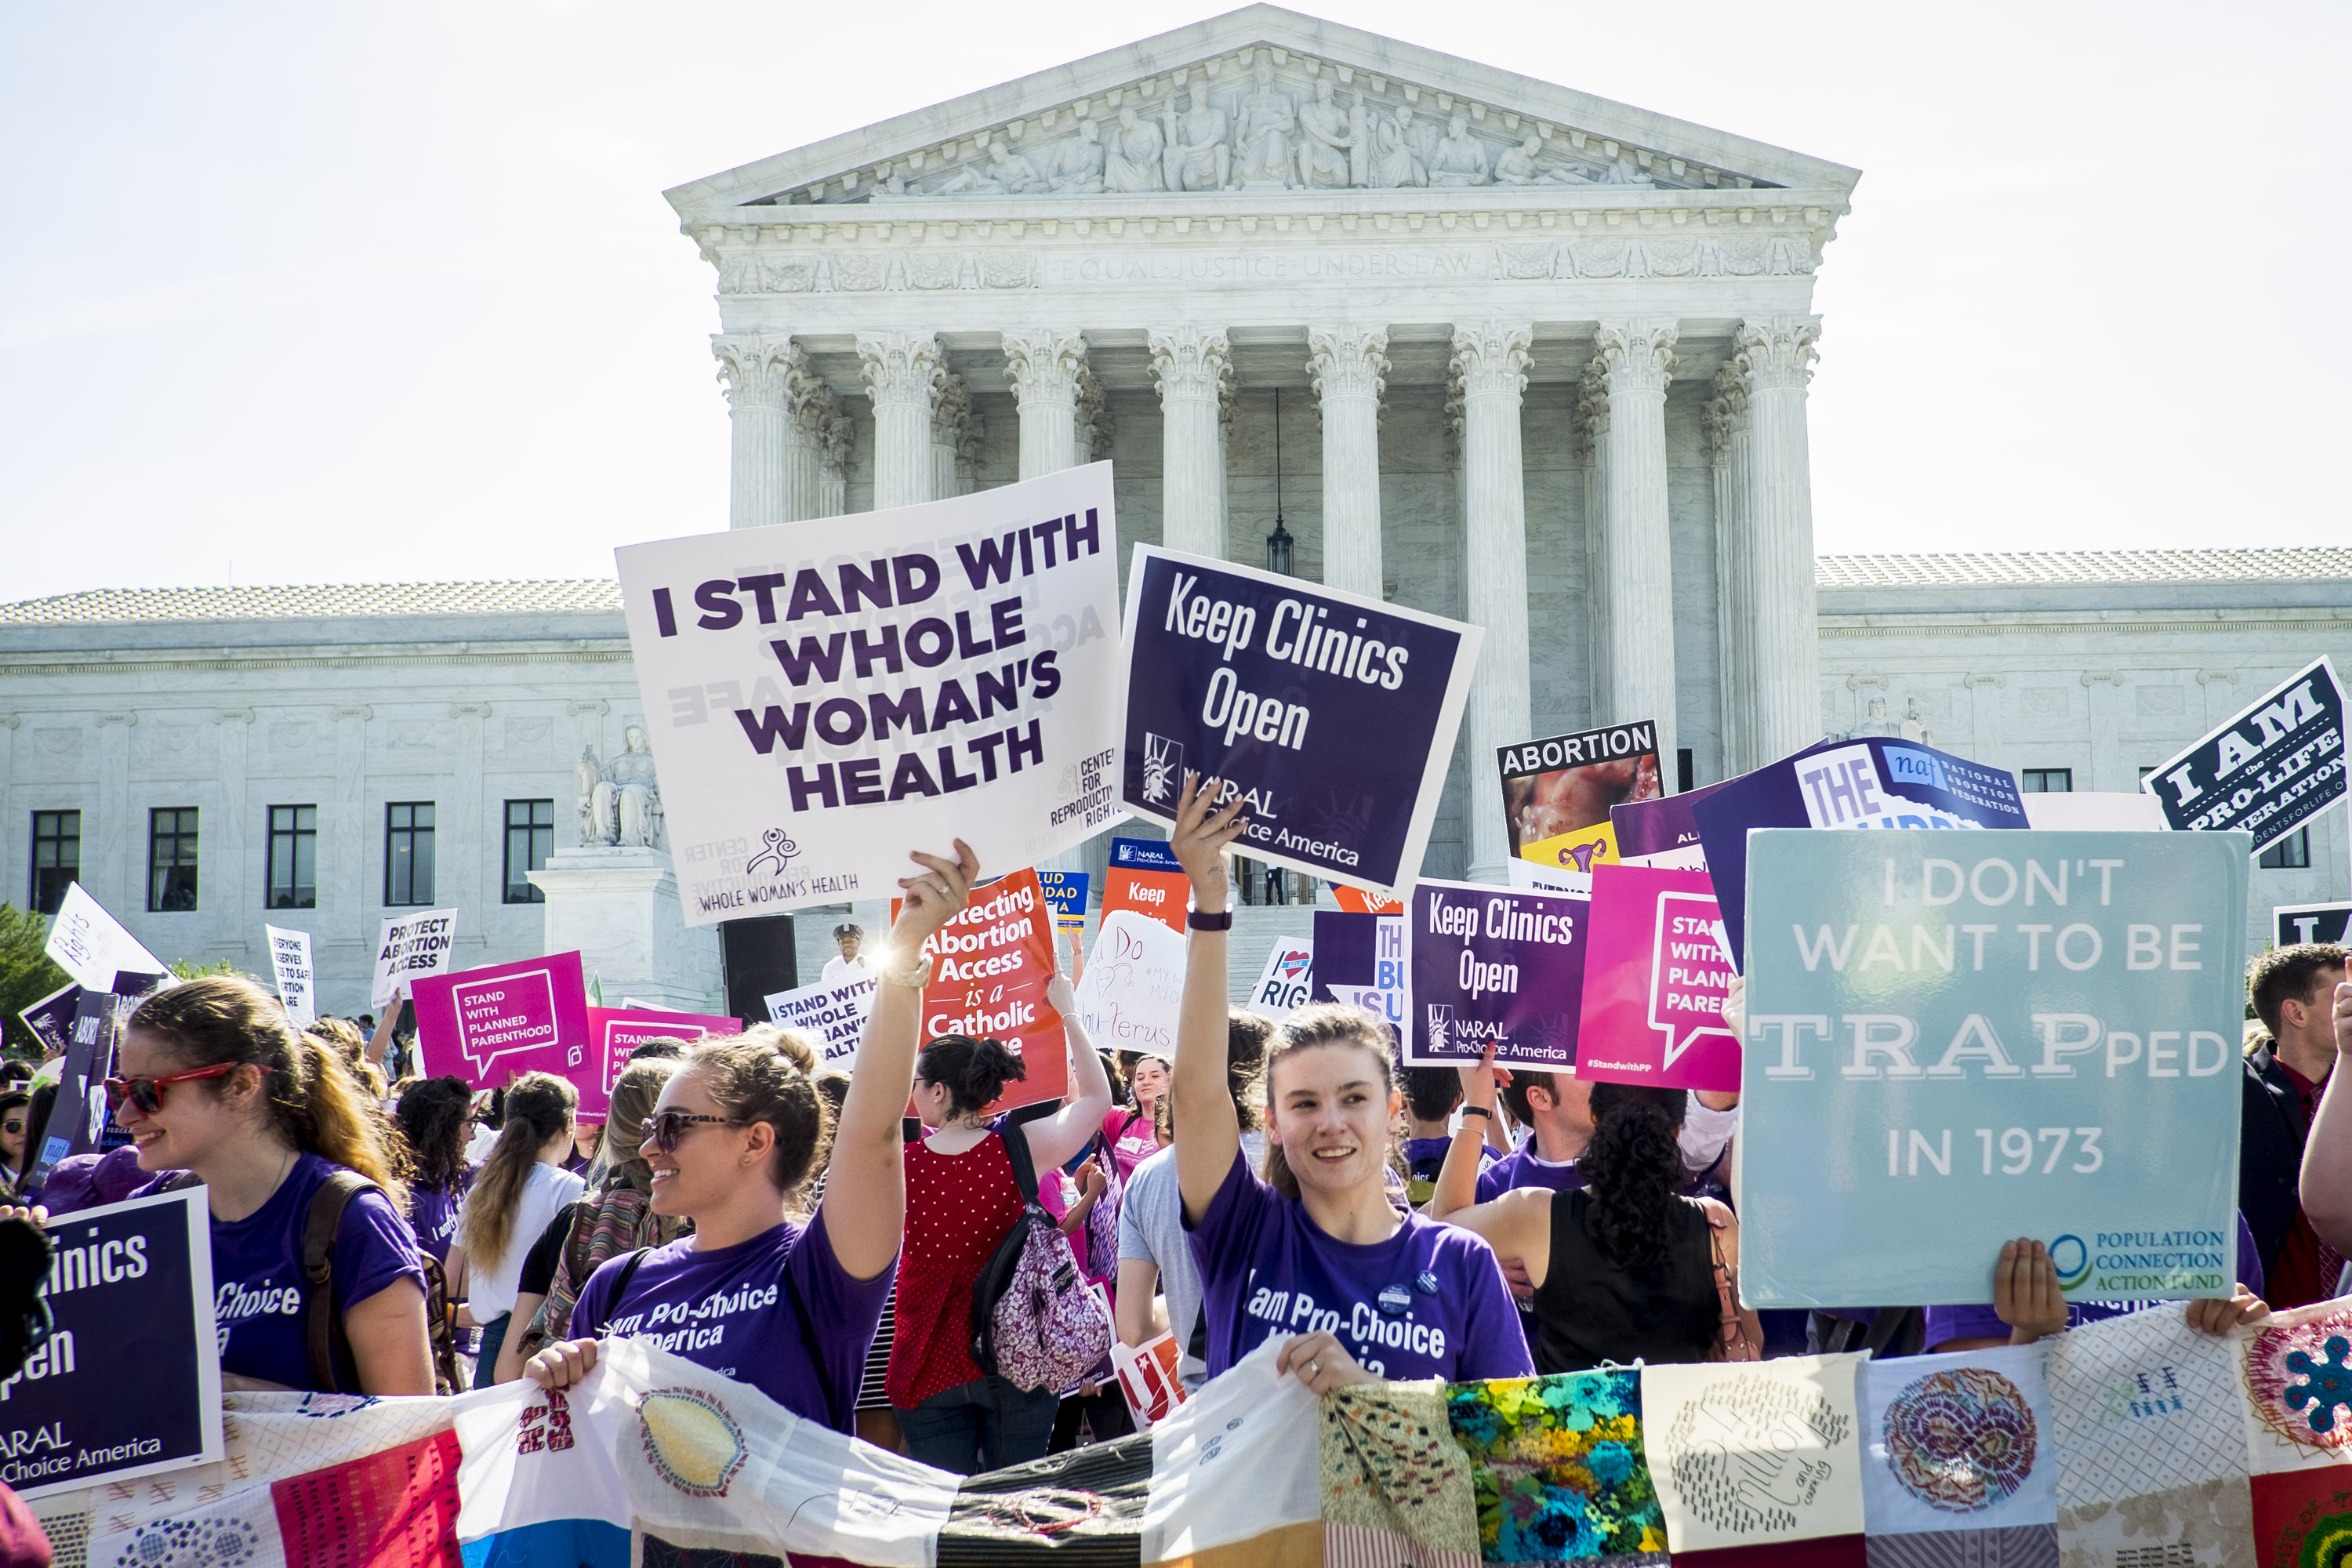 Pro-choice and pro-life activists demonstrate on the steps of the United States Supreme Court in Washington, D.C. on June 27, 2016. (Pete Marovich—Getty Images)